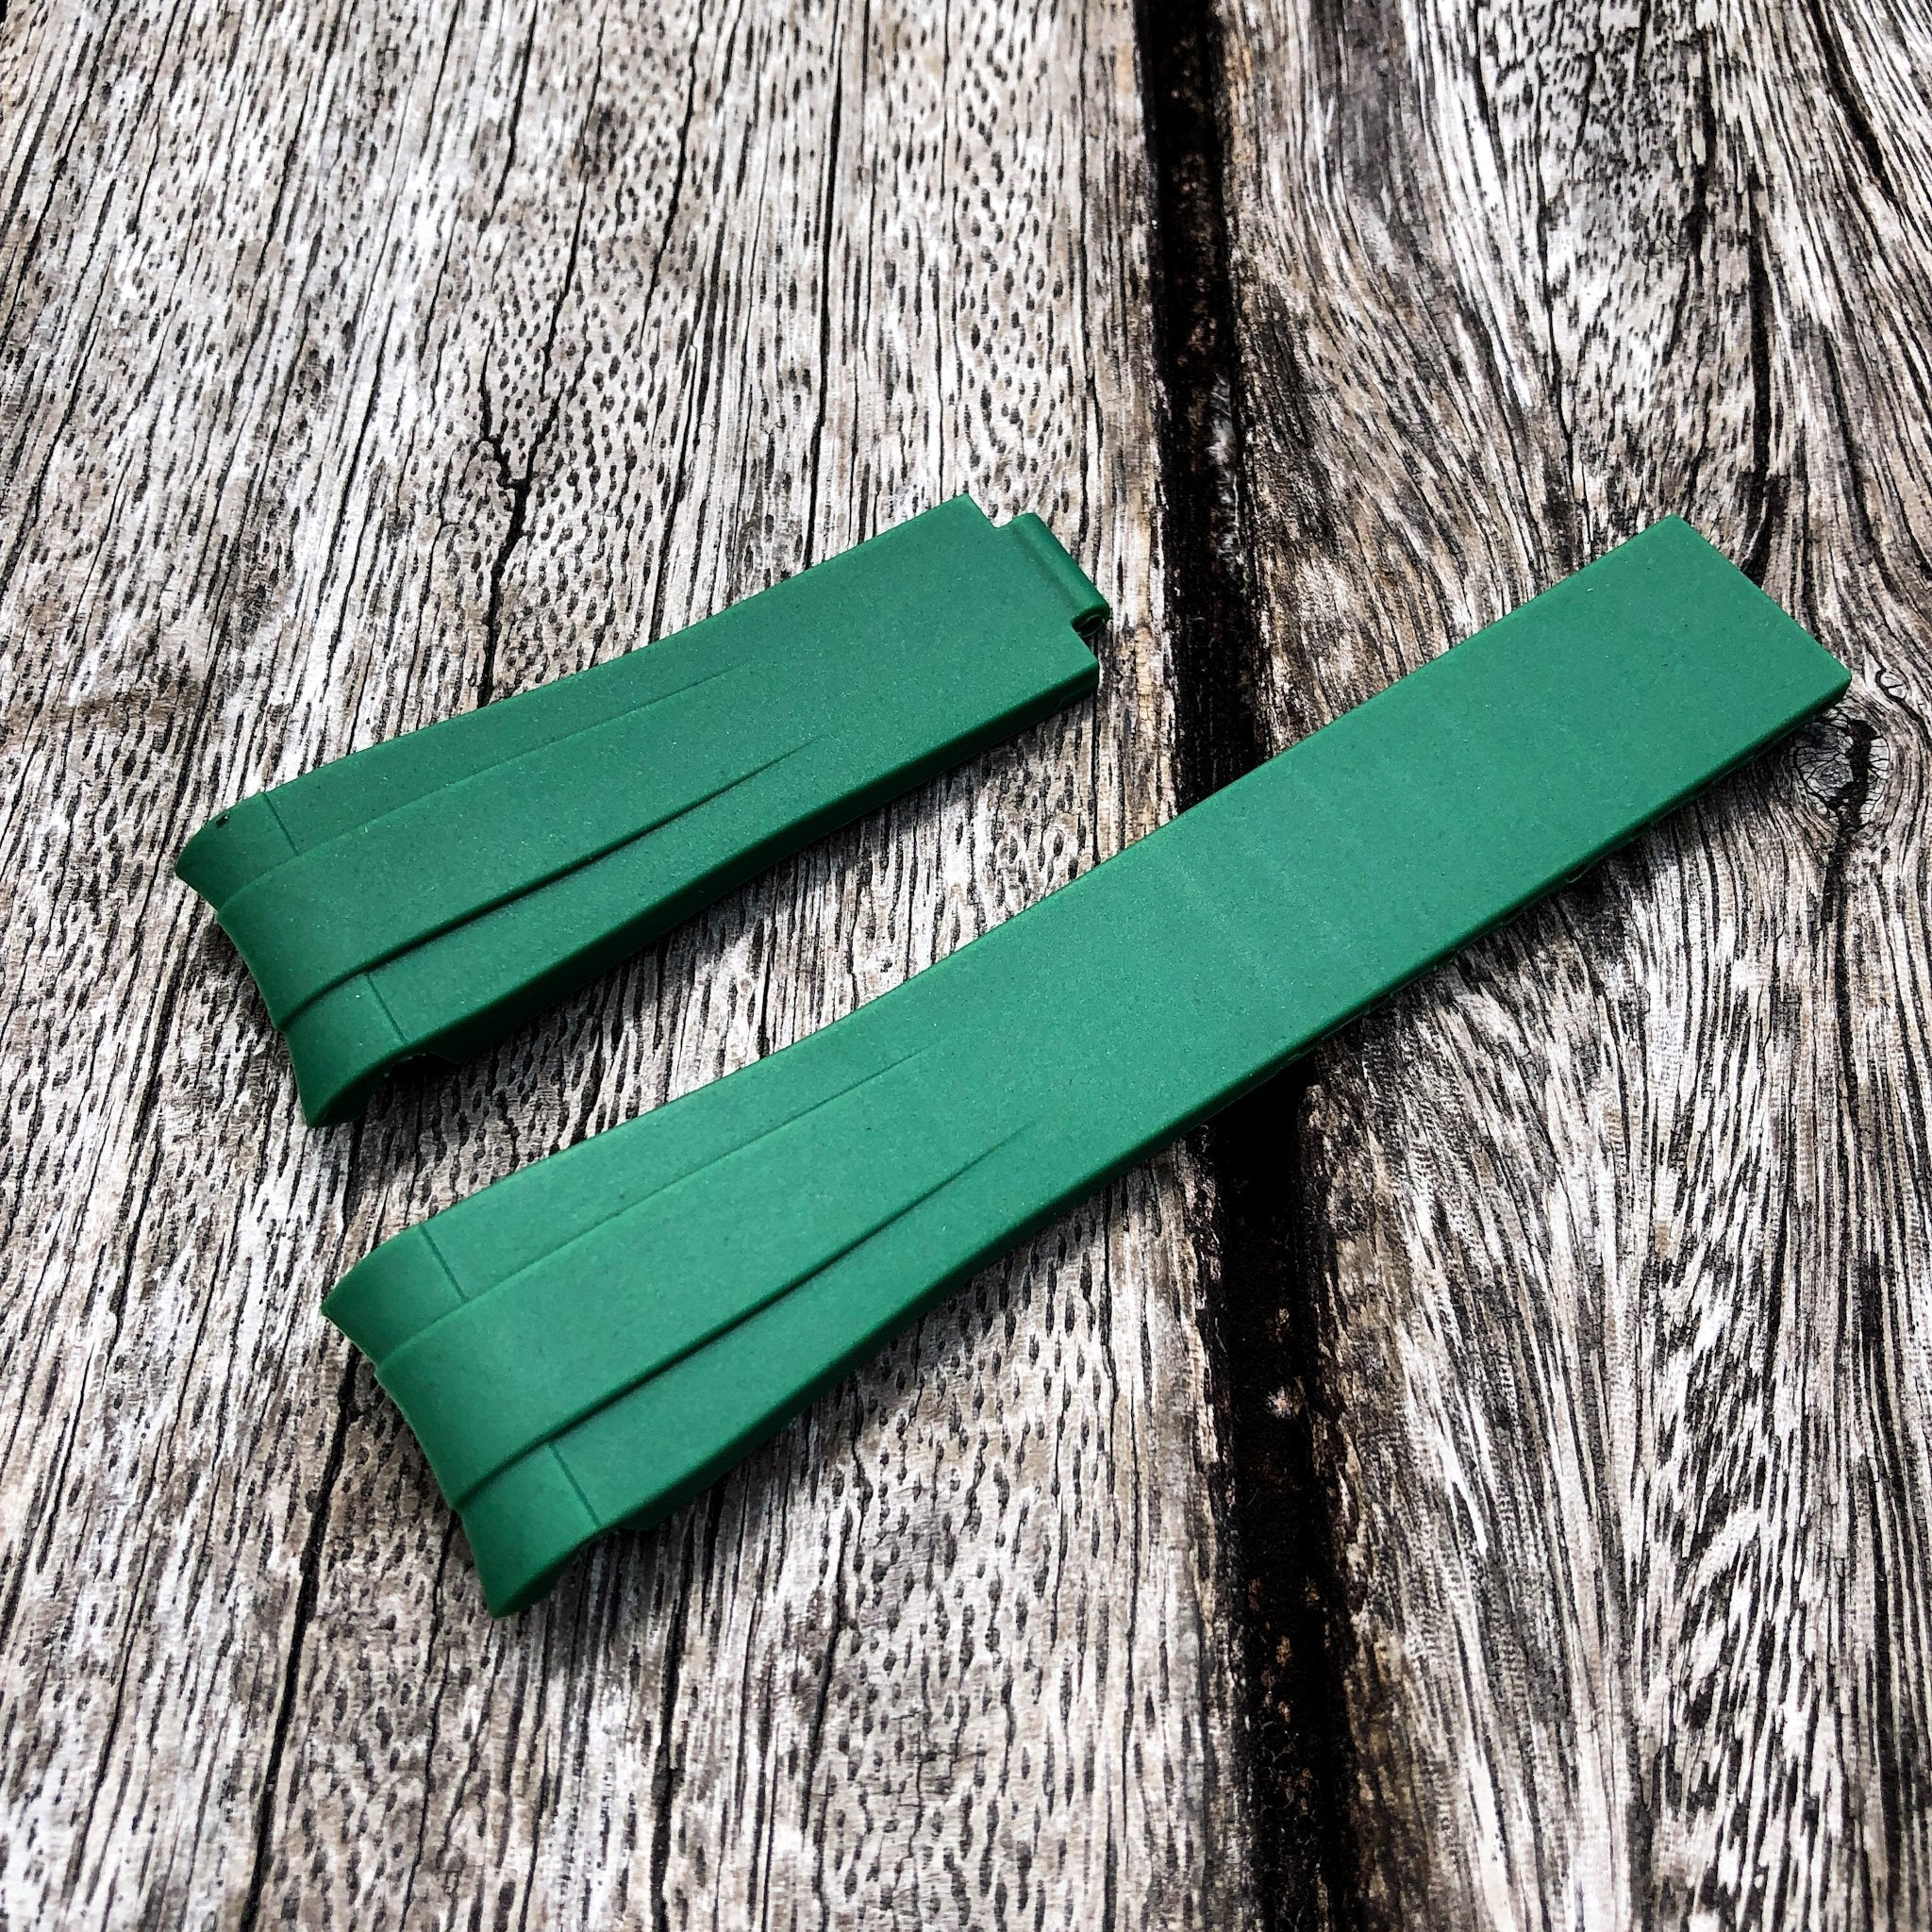 Aqua Series | Green Rubber Watch Strap For Rolex with Curved End - Samurai Vintage Co.